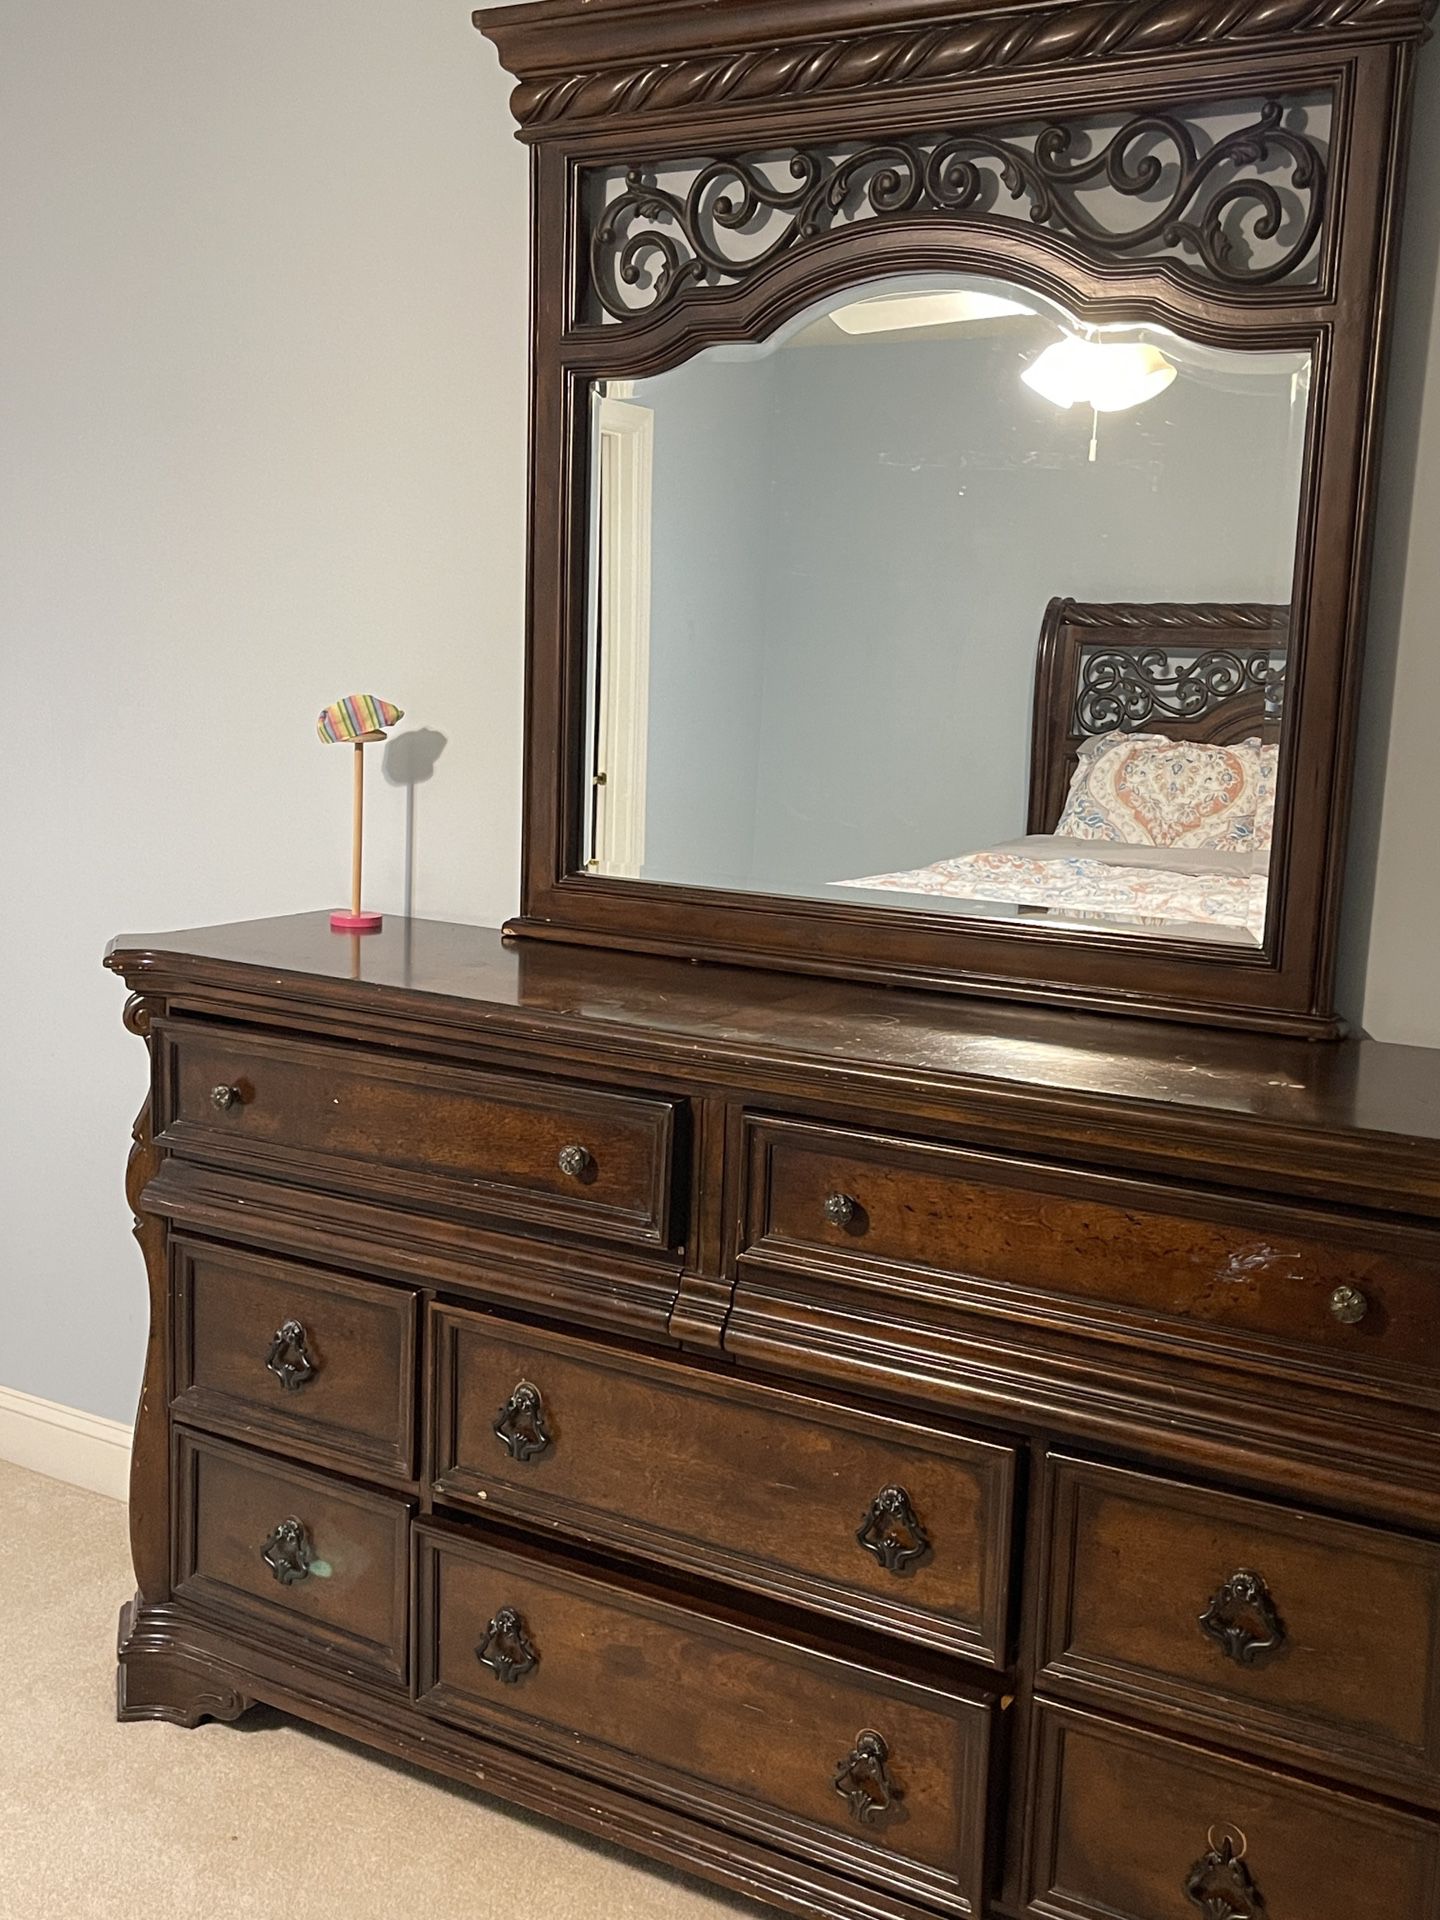 Raymour & Flanigan Bedroom Set For Sell